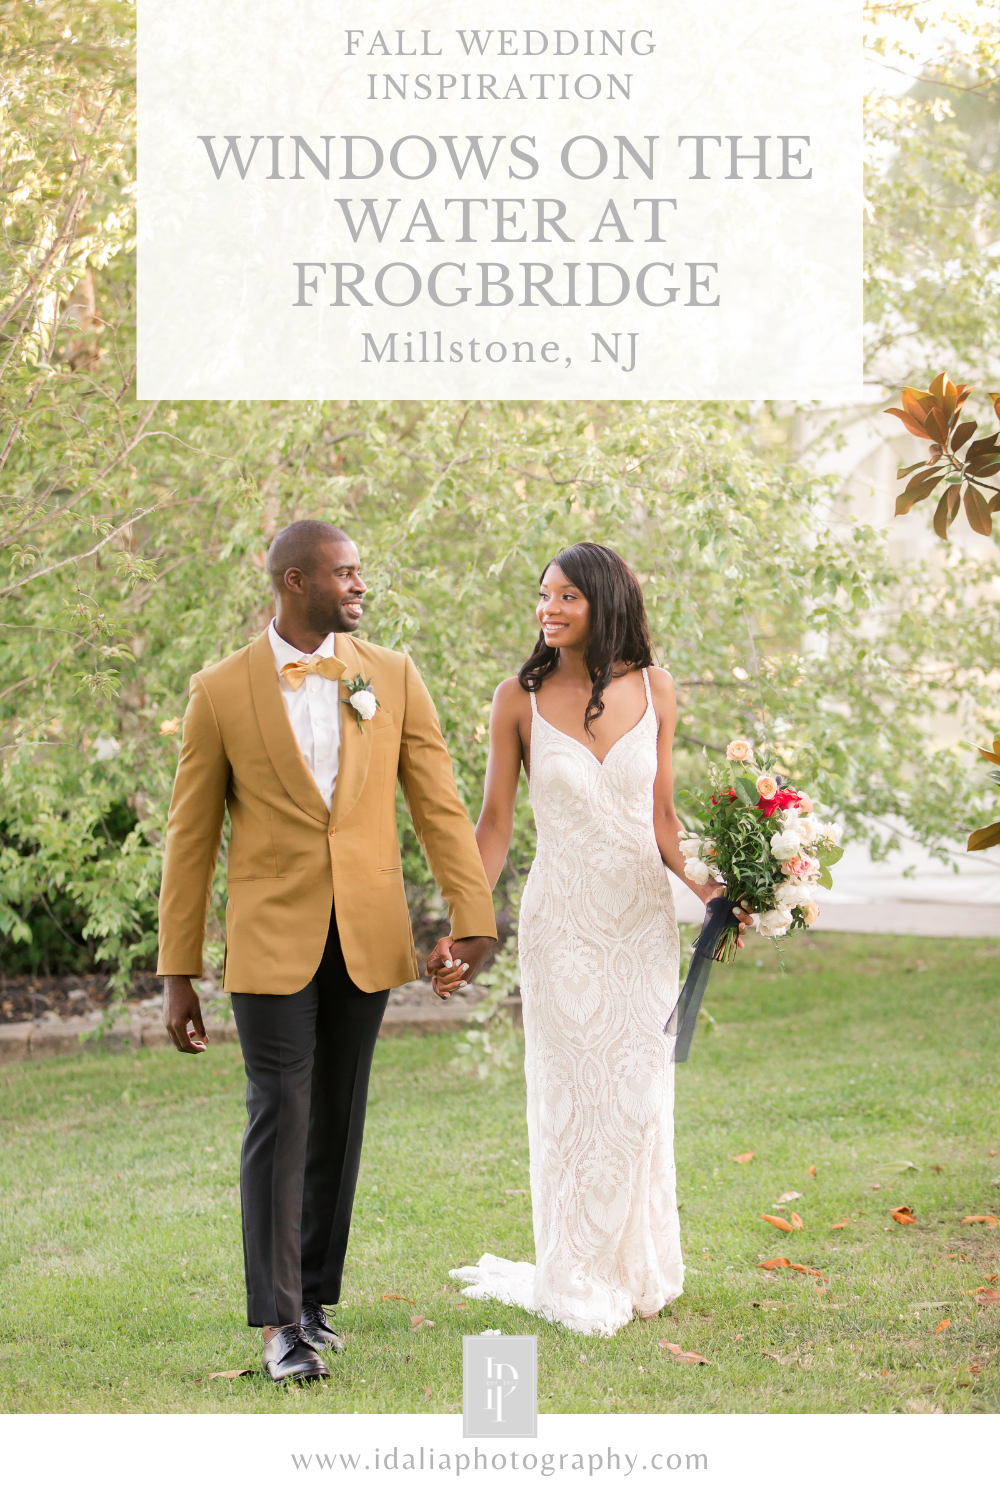 Fall Wedding inspiration at Windows on the Water at Frogbridge